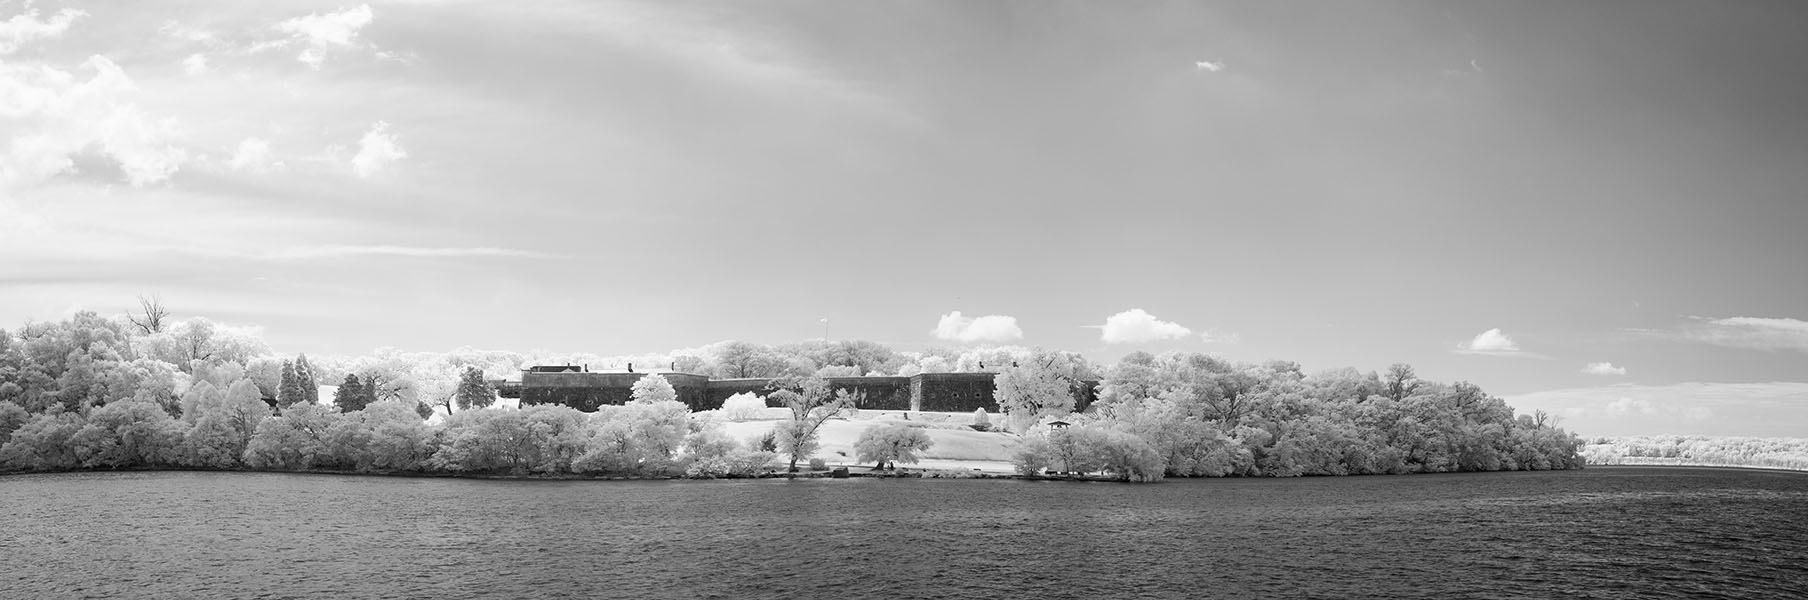 Infrared View of Fort Washingon on the Potomac River.